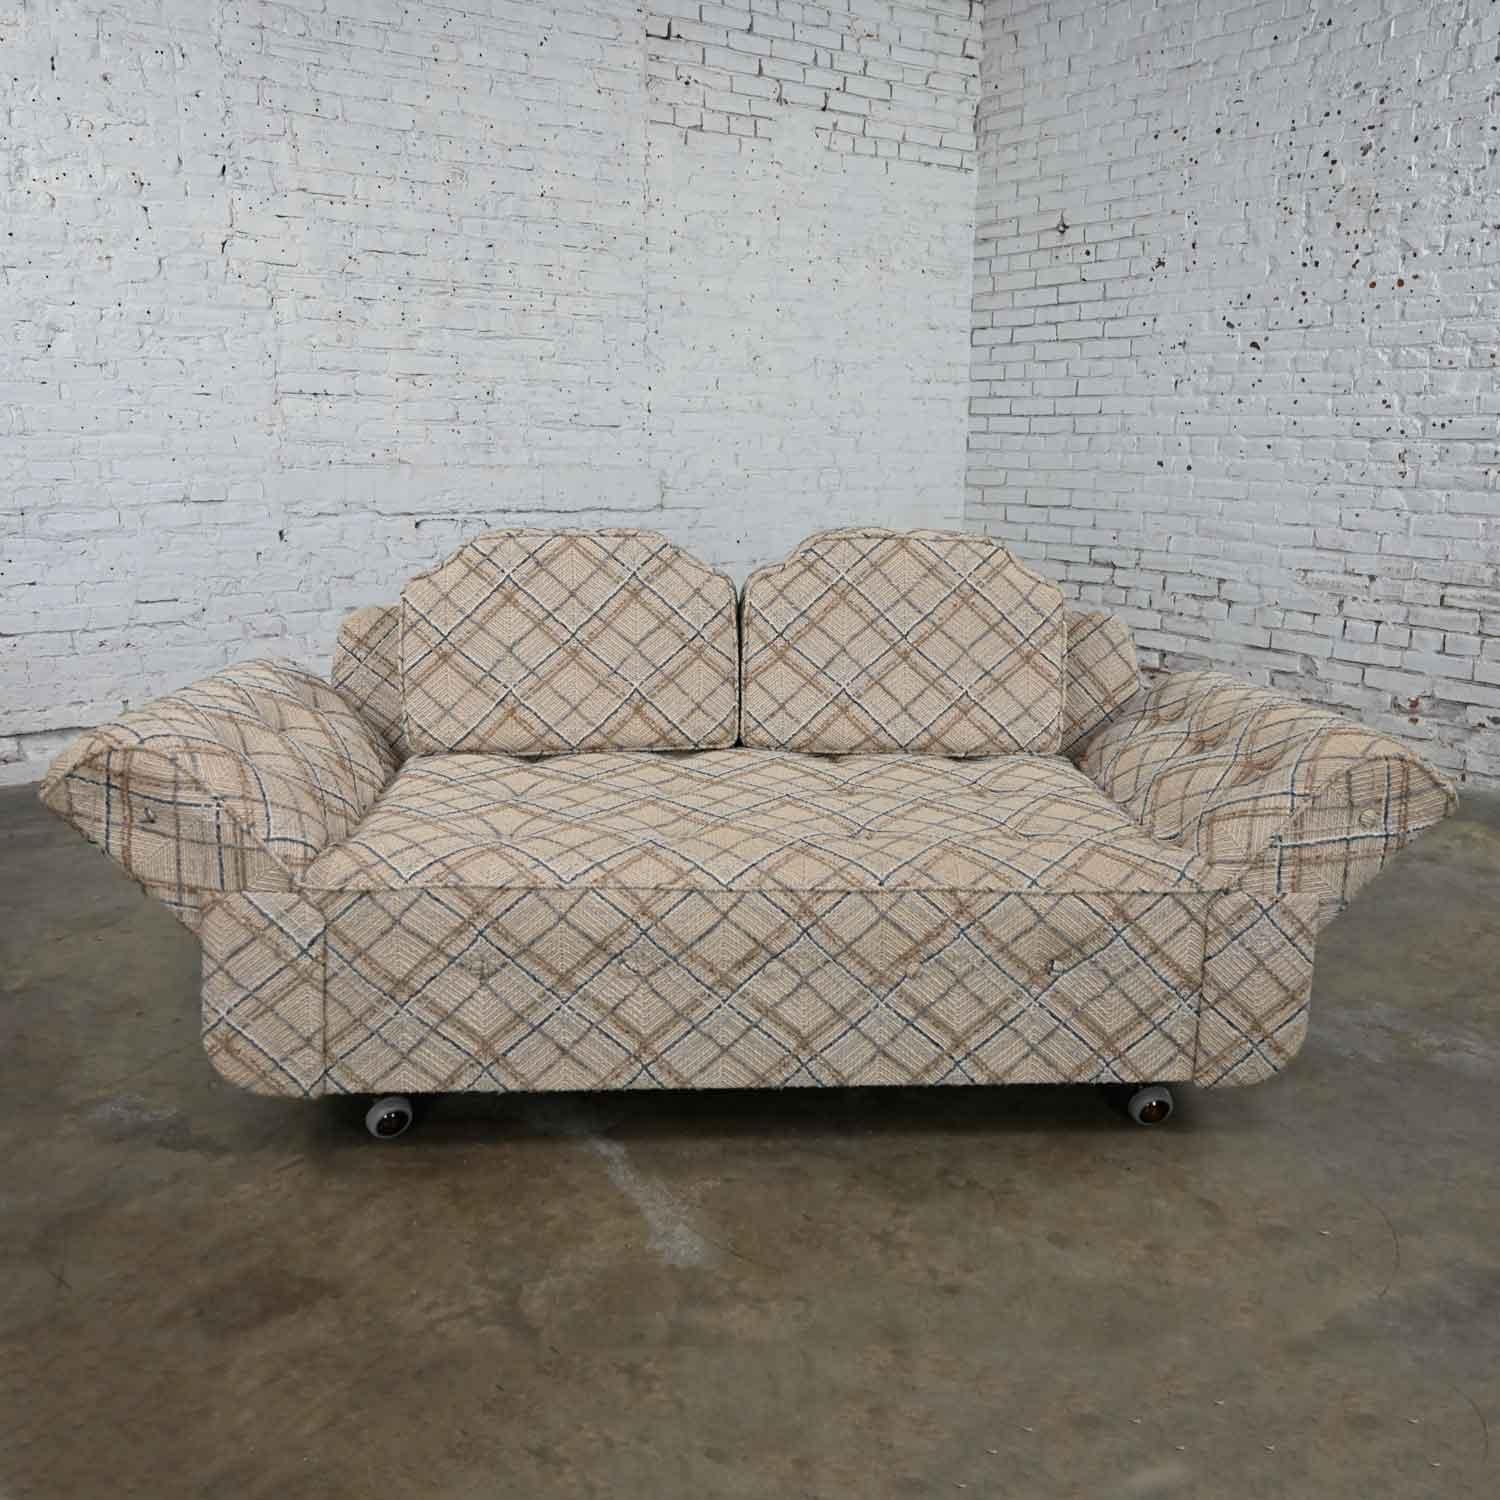 20th Century Modern-MCM Oatmeal Blue Brown Plaid Convertible Love Seat Sofa Daybed or Chaise